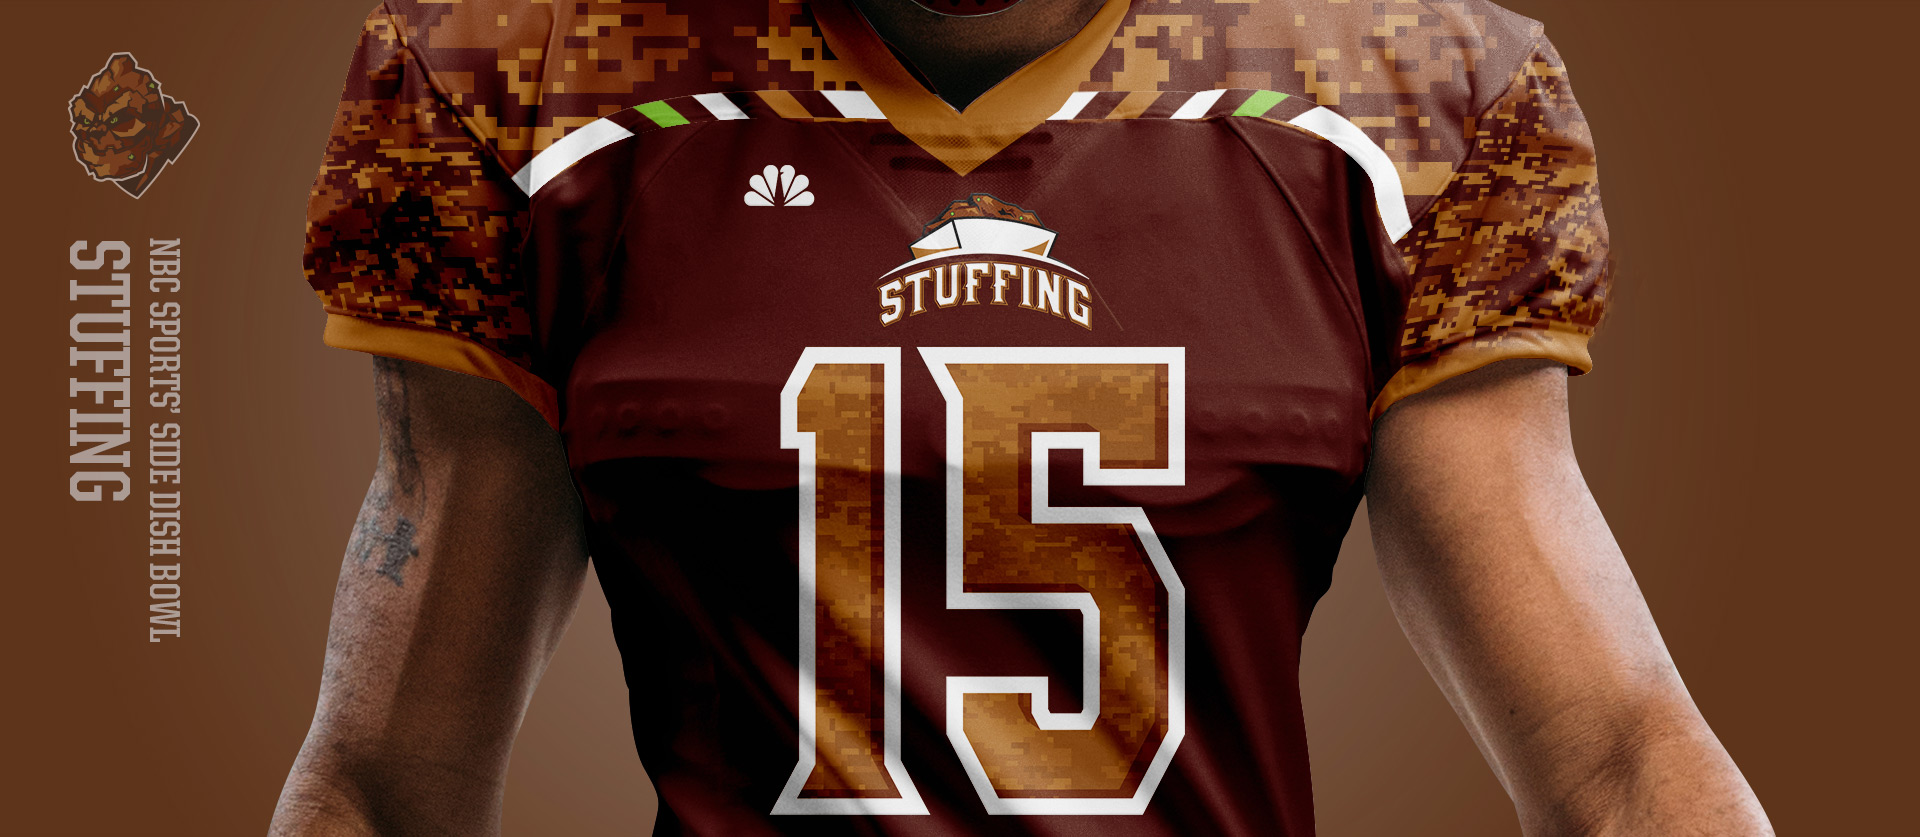 Stuffing Front - Football Uniform Design for NBC Sports Thanksgiving Side Dish Bowl